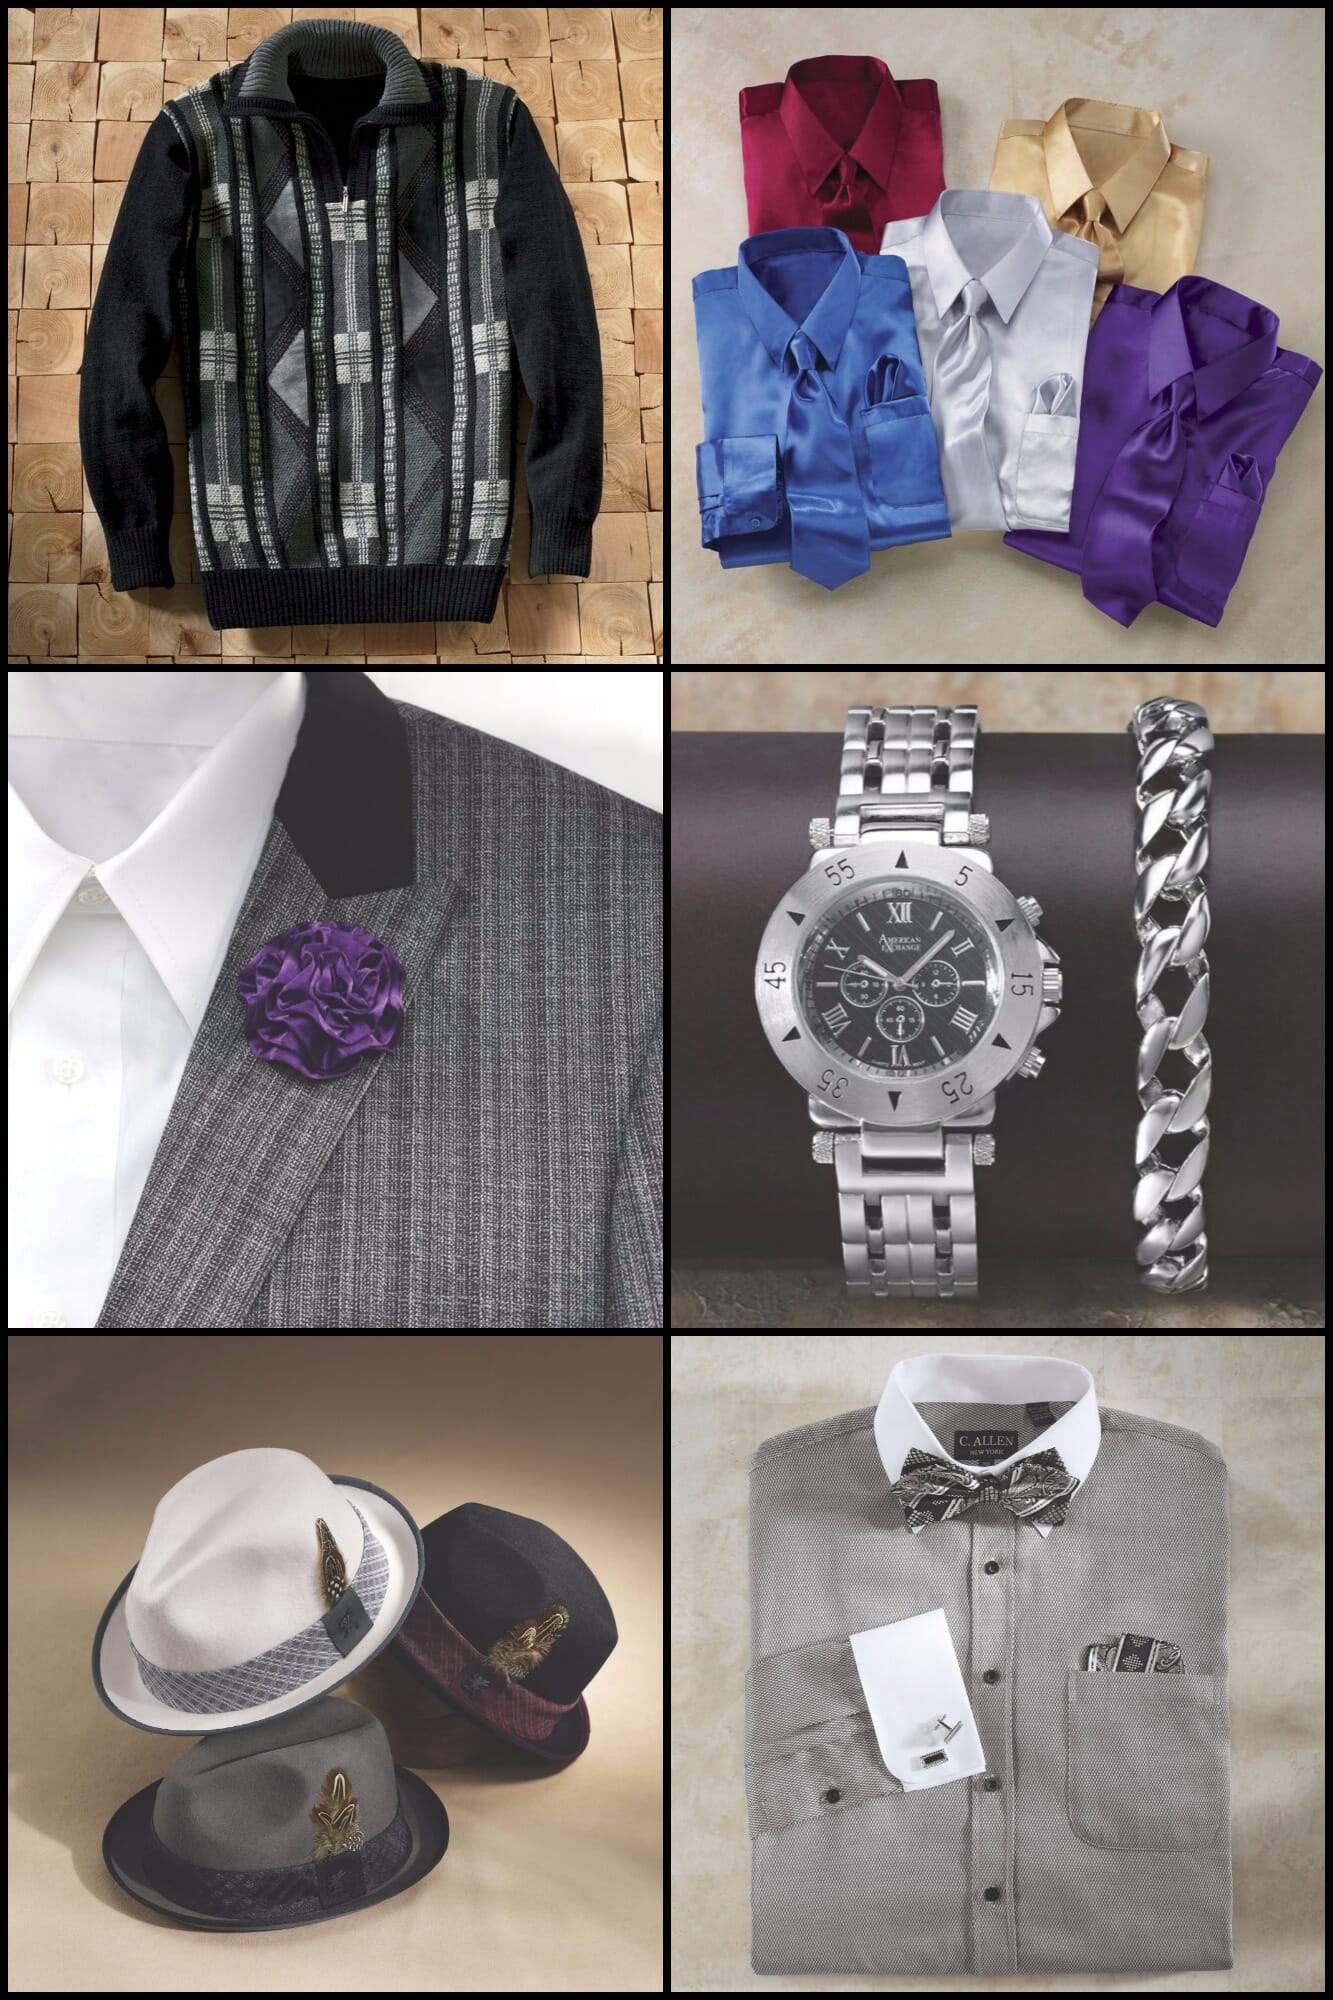 variety of men's clothing & accessories